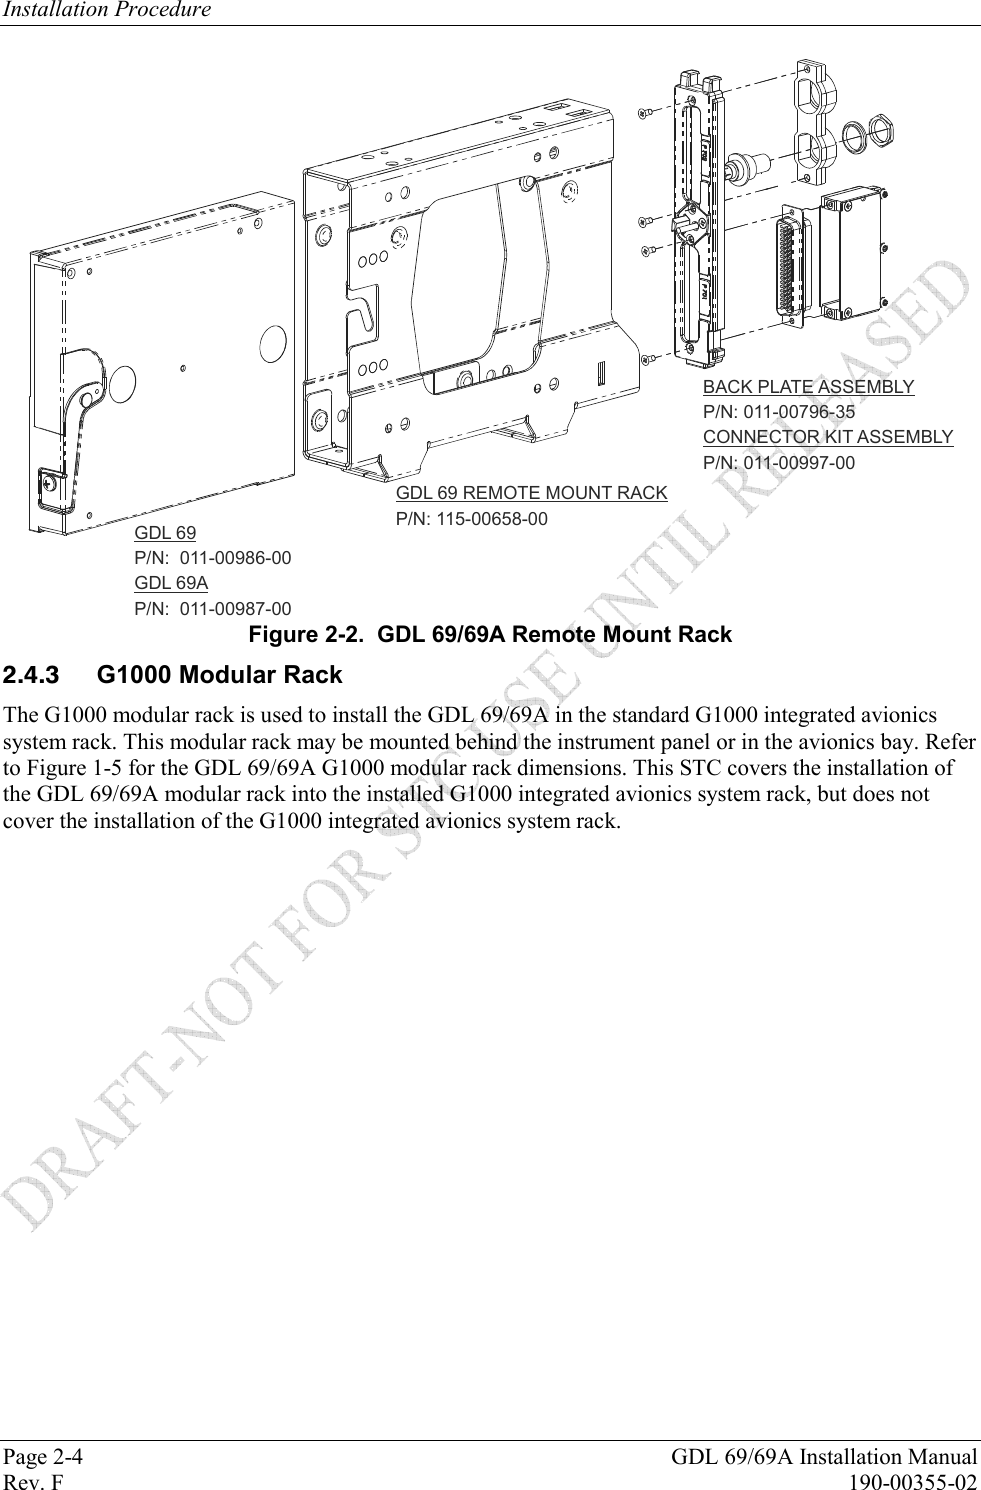 Installation Procedure Page 2-4  GDL 69/69A Installation Manual Rev. F  190-00355-02 GDL 69P/N:  011-00986-00P/N:  011-00987-00GDL 69ABACK PLATE ASSEMBLY P/N: 011-00796-35CONNECTOR KIT ASSEMBLY P/N: 011-00997-00GDL 69 REMOTE MOUNT RACKP/N: 115-00658-00  Figure 2-2.  GDL 69/69A Remote Mount Rack   G1000 Modular Rack The G1000 modular rack is used to install the GDL 69/69A in the standard G1000 integrated avionics system rack. This modular rack may be mounted behind the instrument panel or in the avionics bay. Refer to Figure 1-5 for the GDL 69/69A G1000 modular rack dimensions. This STC covers the installation of the GDL 69/69A modular rack into the installed G1000 integrated avionics system rack, but does not cover the installation of the G1000 integrated avionics system rack. 